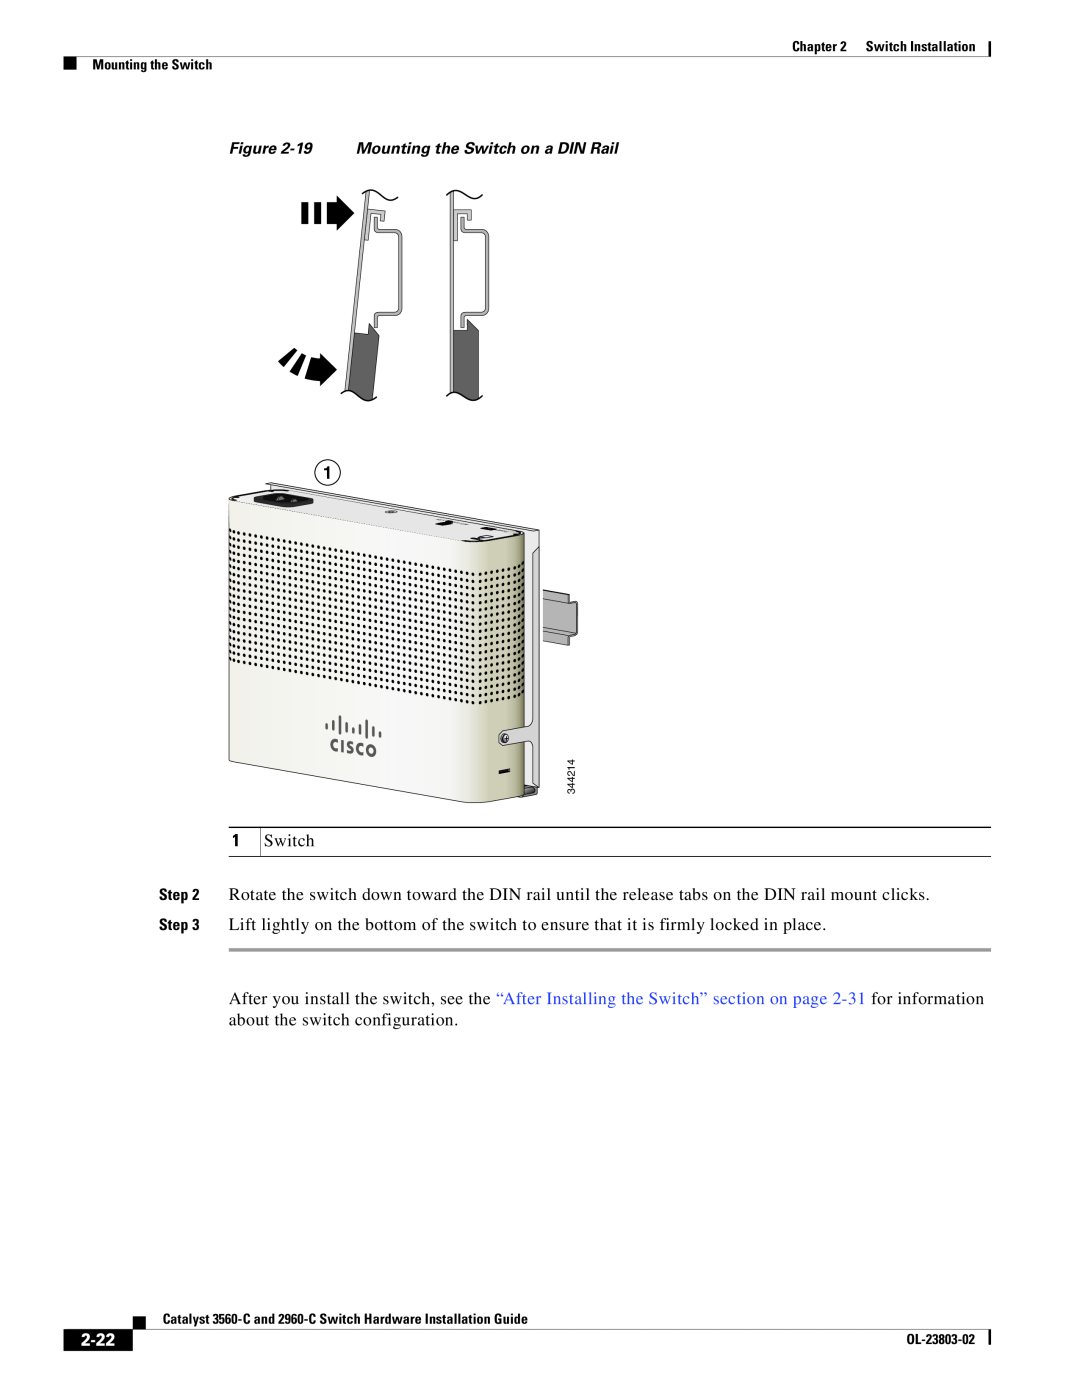 Cisco Systems N55M4Q manual 2-22, 19 Mounting the Switch on a DIN Rail 